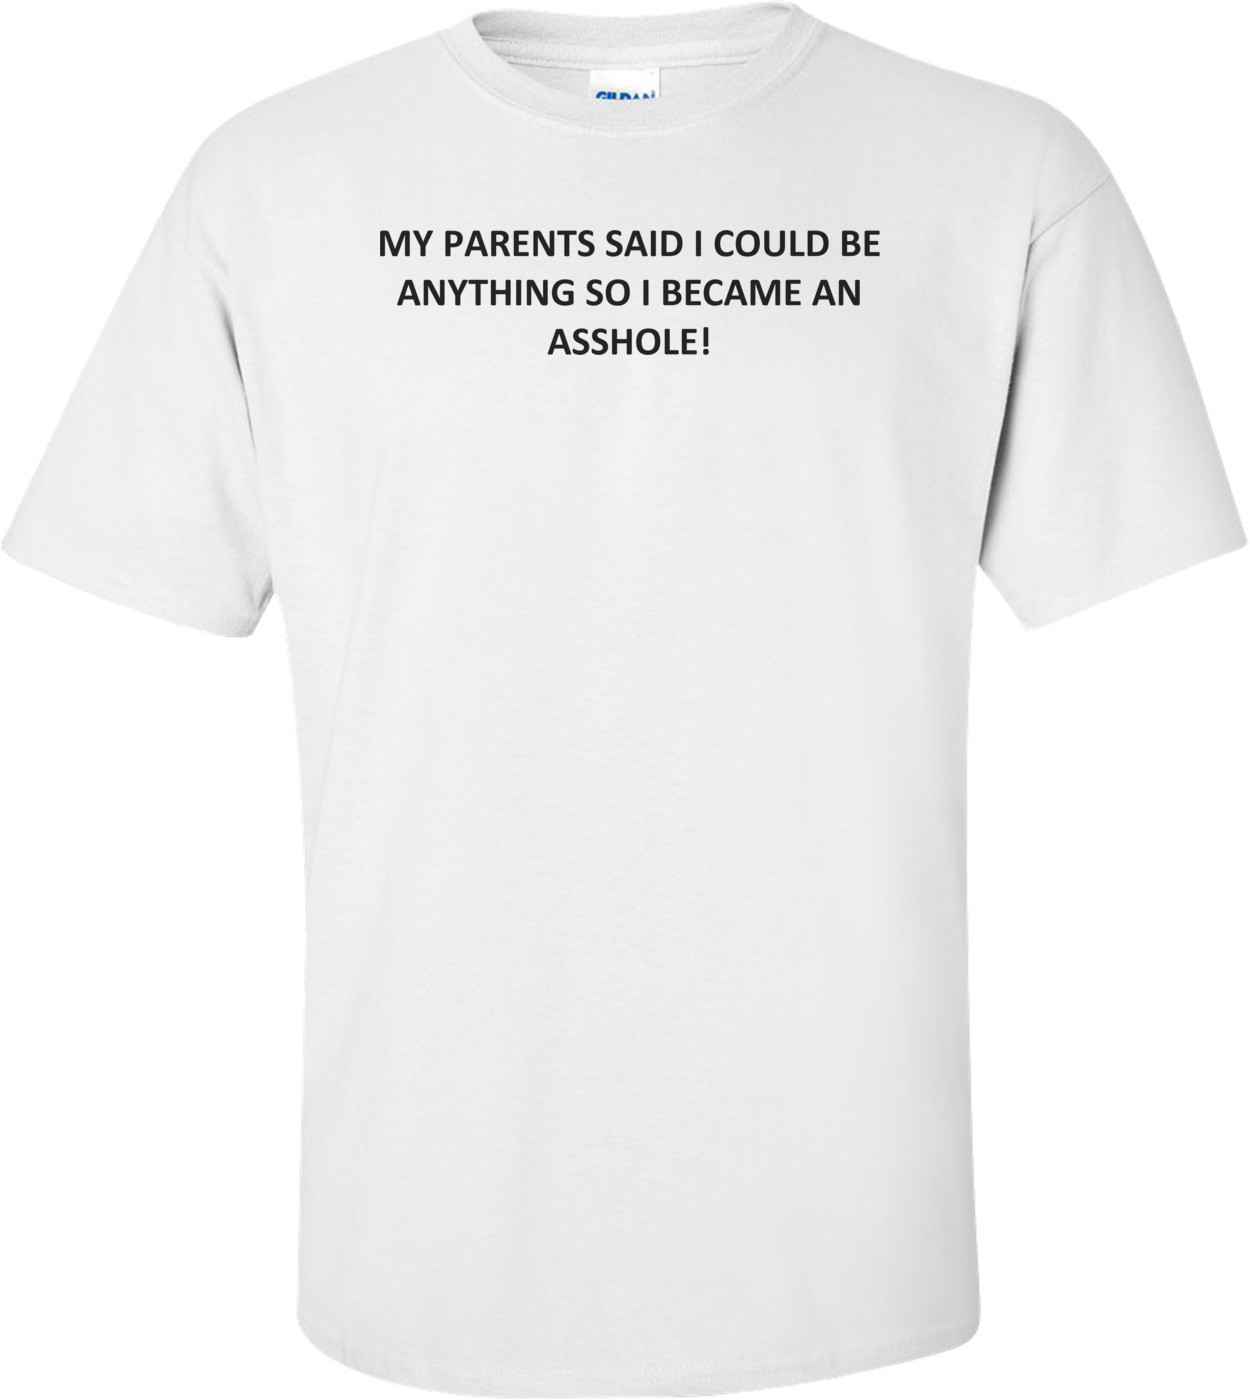 MY PARENTS SAID I COULD BE ANYTHING SO I BECAME AN ASSHOLE! Shirt